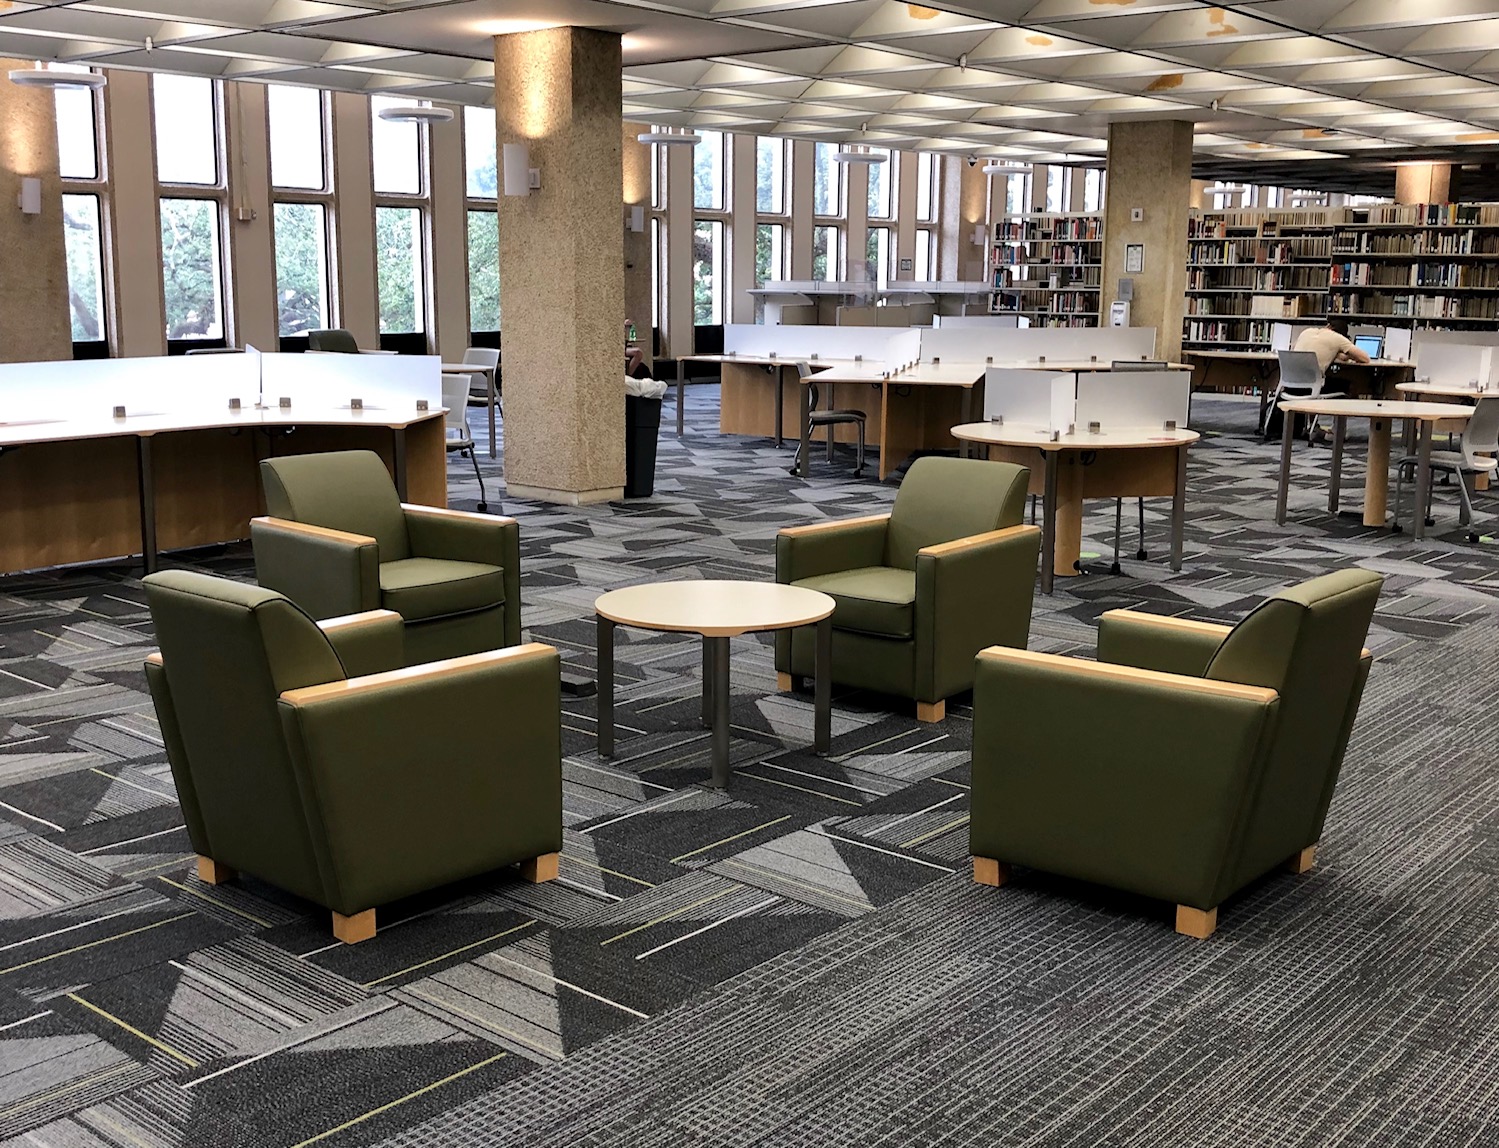 Lounge chair seating as well as work table areas separated by low dividers in the 2nd Floor Study Commons. Narrow windows look out on the front of the building.